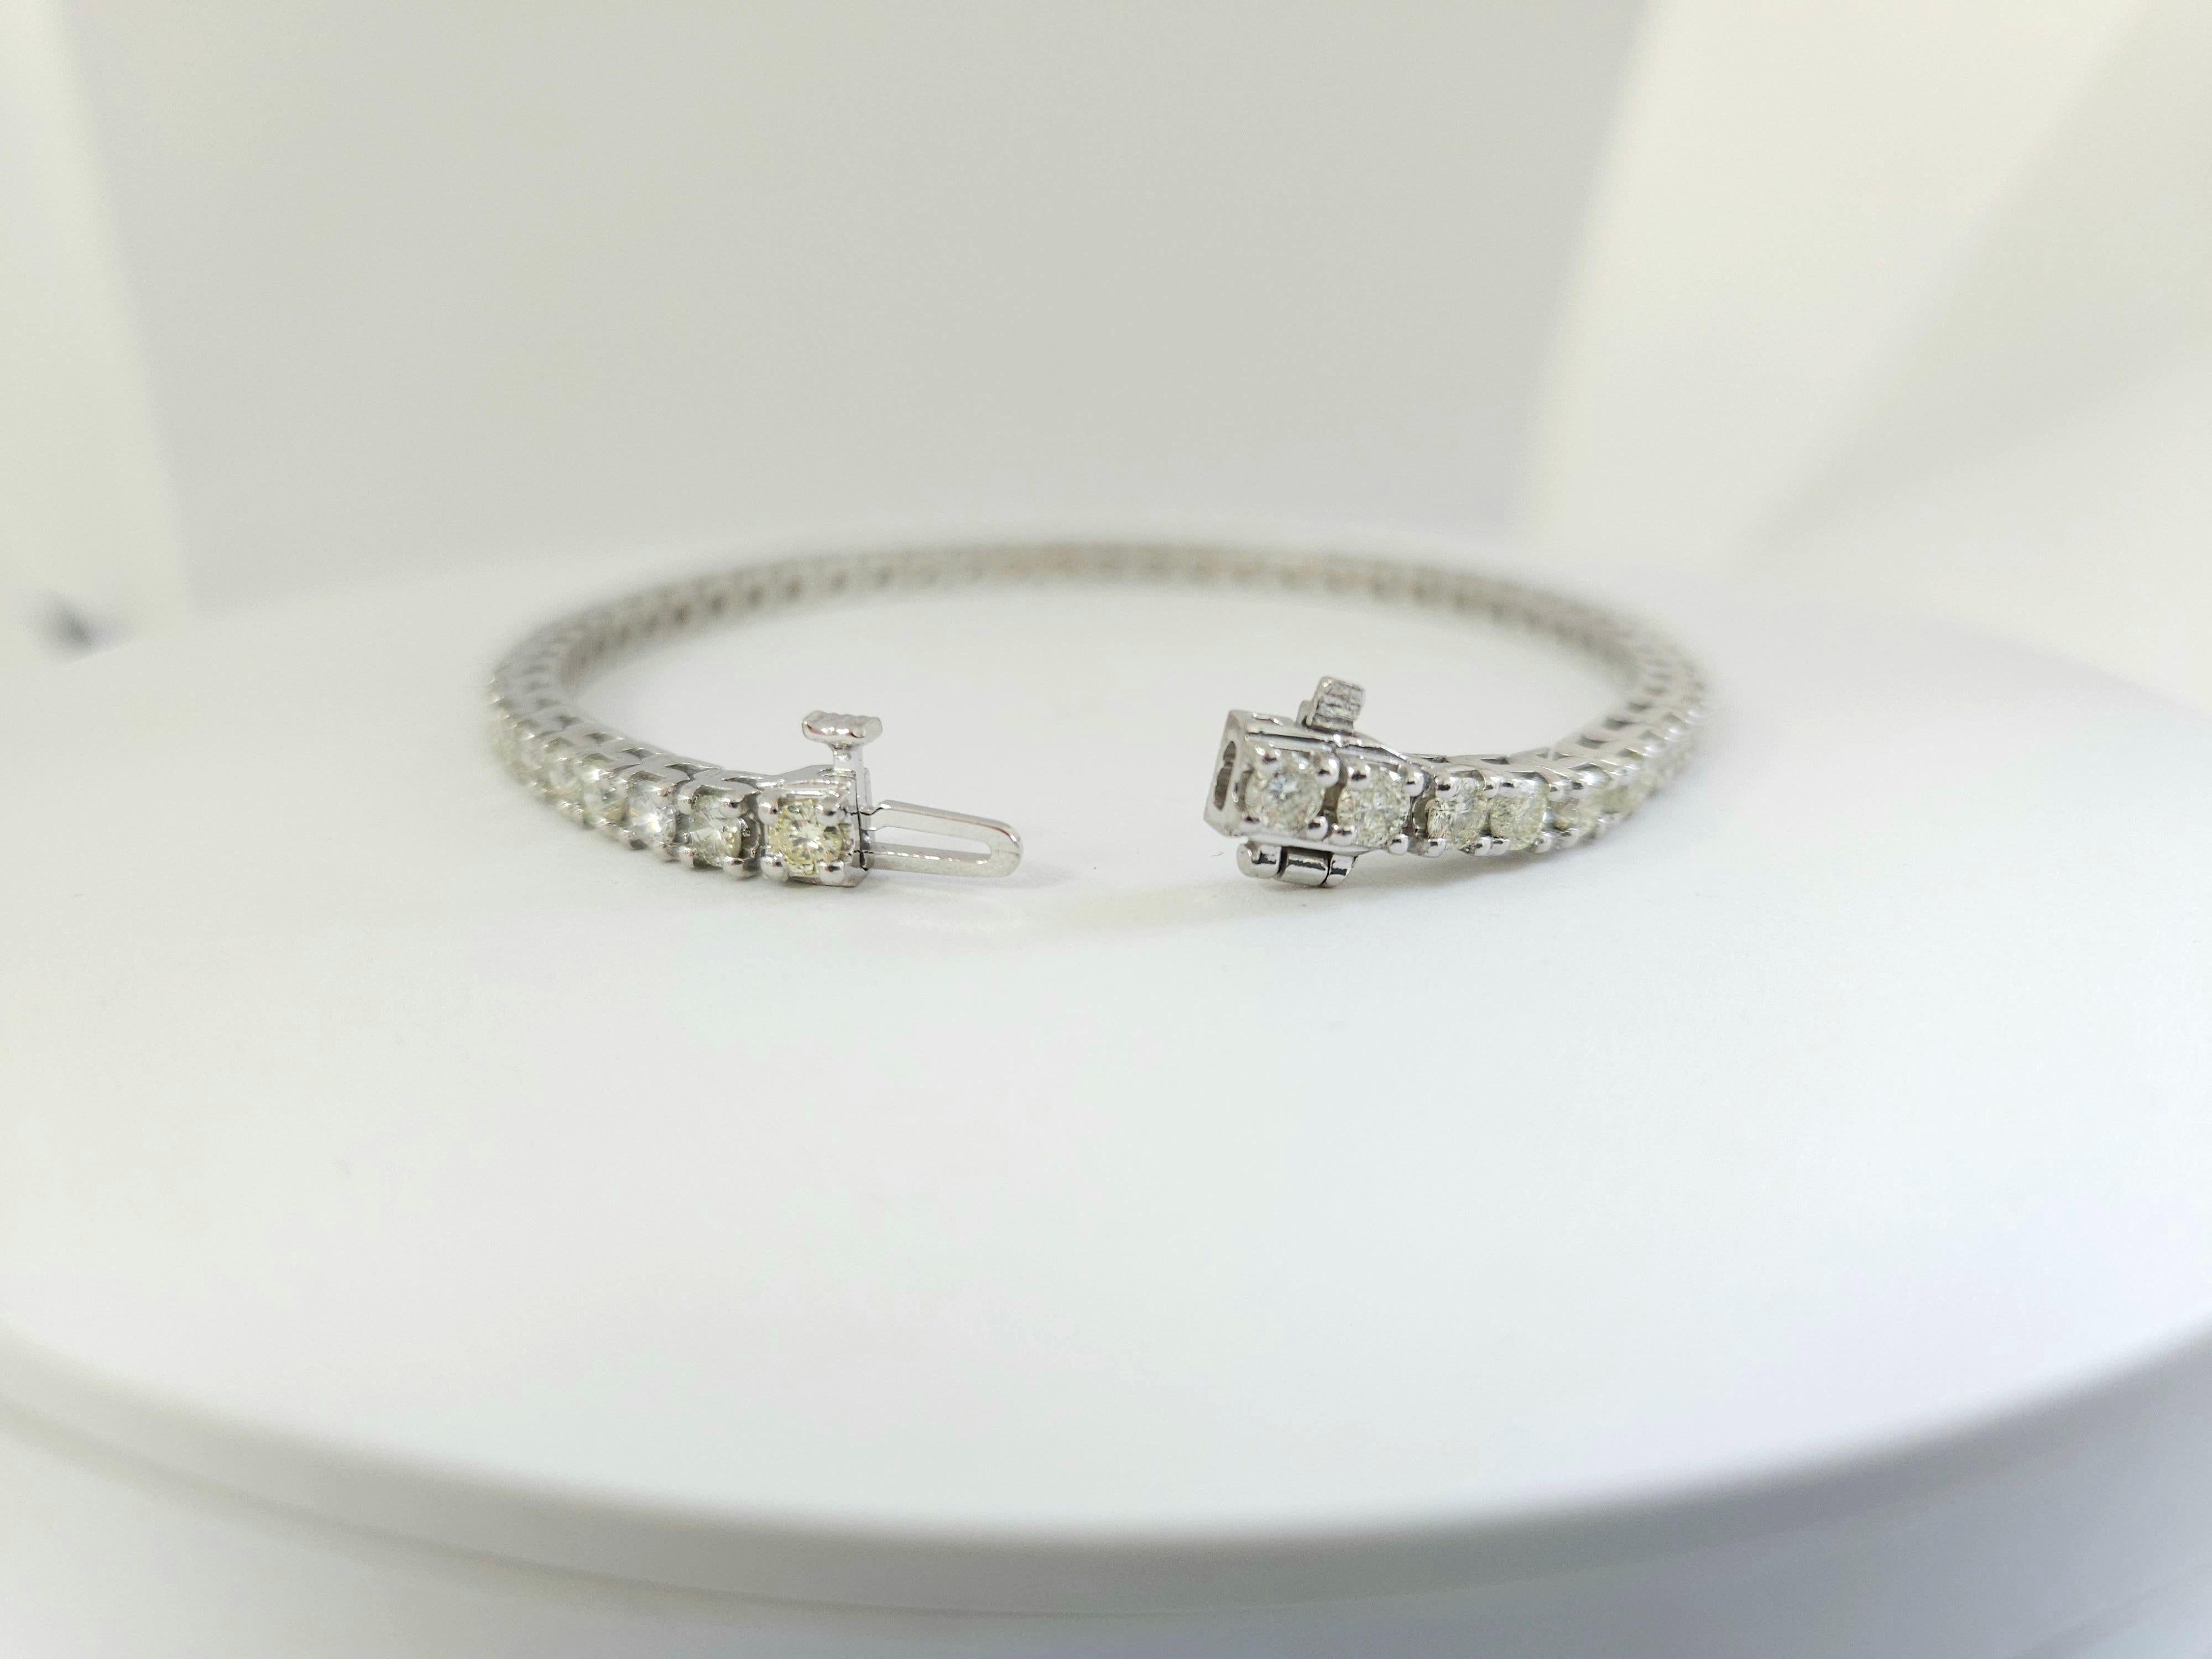 5.20 Carat Round Brilliant Cut Diamond Tennis Bracelet 14 Karat White Gold In New Condition For Sale In Great Neck, NY